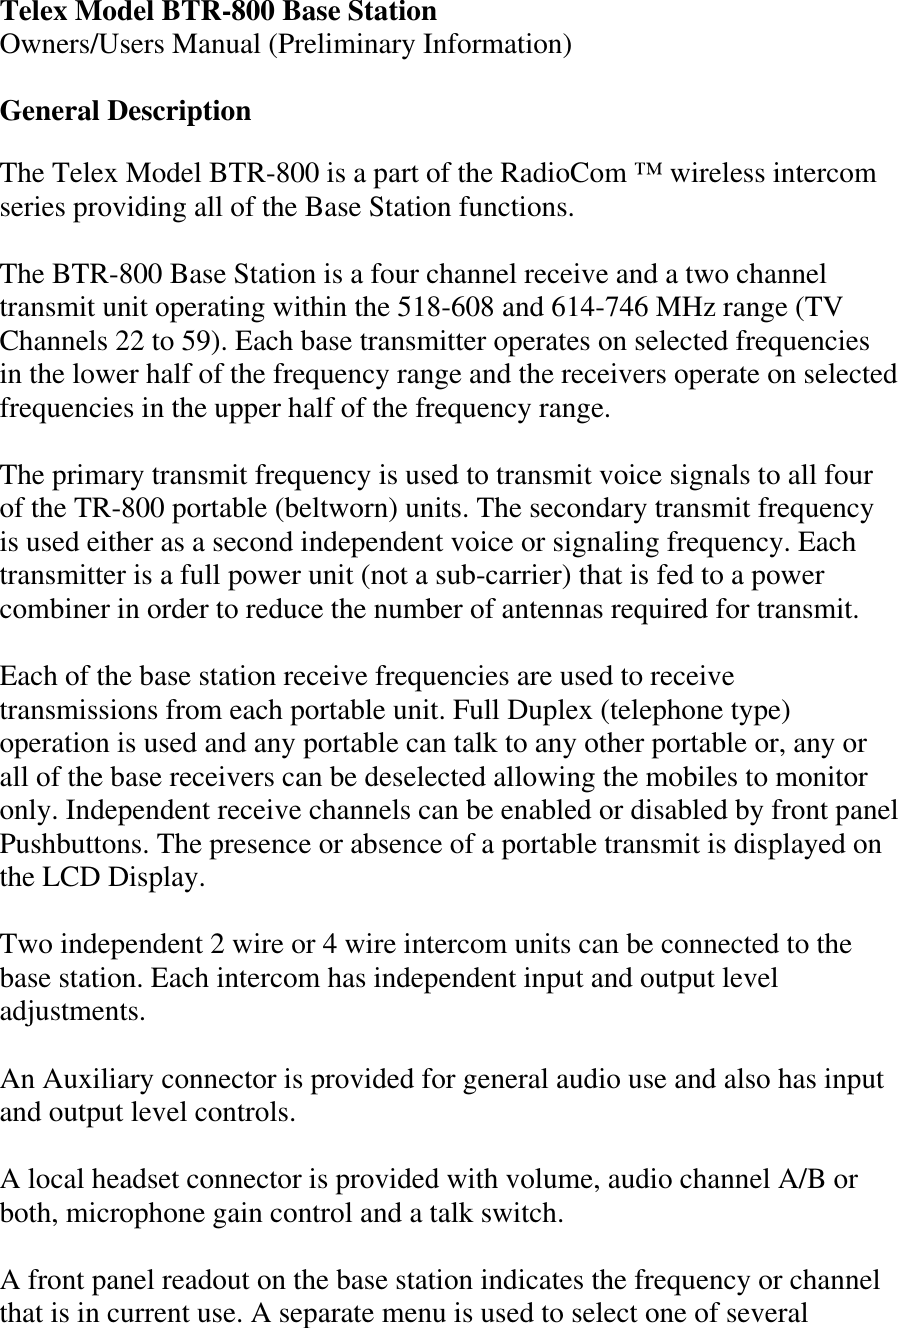 Telex Model BTR-800 Base Station Owners/Users Manual (Preliminary Information)  General Description  The Telex Model BTR-800 is a part of the RadioCom ™ wireless intercom series providing all of the Base Station functions.  The BTR-800 Base Station is a four channel receive and a two channel transmit unit operating within the 518-608 and 614-746 MHz range (TV Channels 22 to 59). Each base transmitter operates on selected frequencies in the lower half of the frequency range and the receivers operate on selected frequencies in the upper half of the frequency range.  The primary transmit frequency is used to transmit voice signals to all four of the TR-800 portable (beltworn) units. The secondary transmit frequency is used either as a second independent voice or signaling frequency. Each transmitter is a full power unit (not a sub-carrier) that is fed to a power combiner in order to reduce the number of antennas required for transmit.  Each of the base station receive frequencies are used to receive transmissions from each portable unit. Full Duplex (telephone type) operation is used and any portable can talk to any other portable or, any or all of the base receivers can be deselected allowing the mobiles to monitor only. Independent receive channels can be enabled or disabled by front panel Pushbuttons. The presence or absence of a portable transmit is displayed on the LCD Display.  Two independent 2 wire or 4 wire intercom units can be connected to the base station. Each intercom has independent input and output level adjustments.  An Auxiliary connector is provided for general audio use and also has input and output level controls.   A local headset connector is provided with volume, audio channel A/B or both, microphone gain control and a talk switch.     A front panel readout on the base station indicates the frequency or channel that is in current use. A separate menu is used to select one of several 